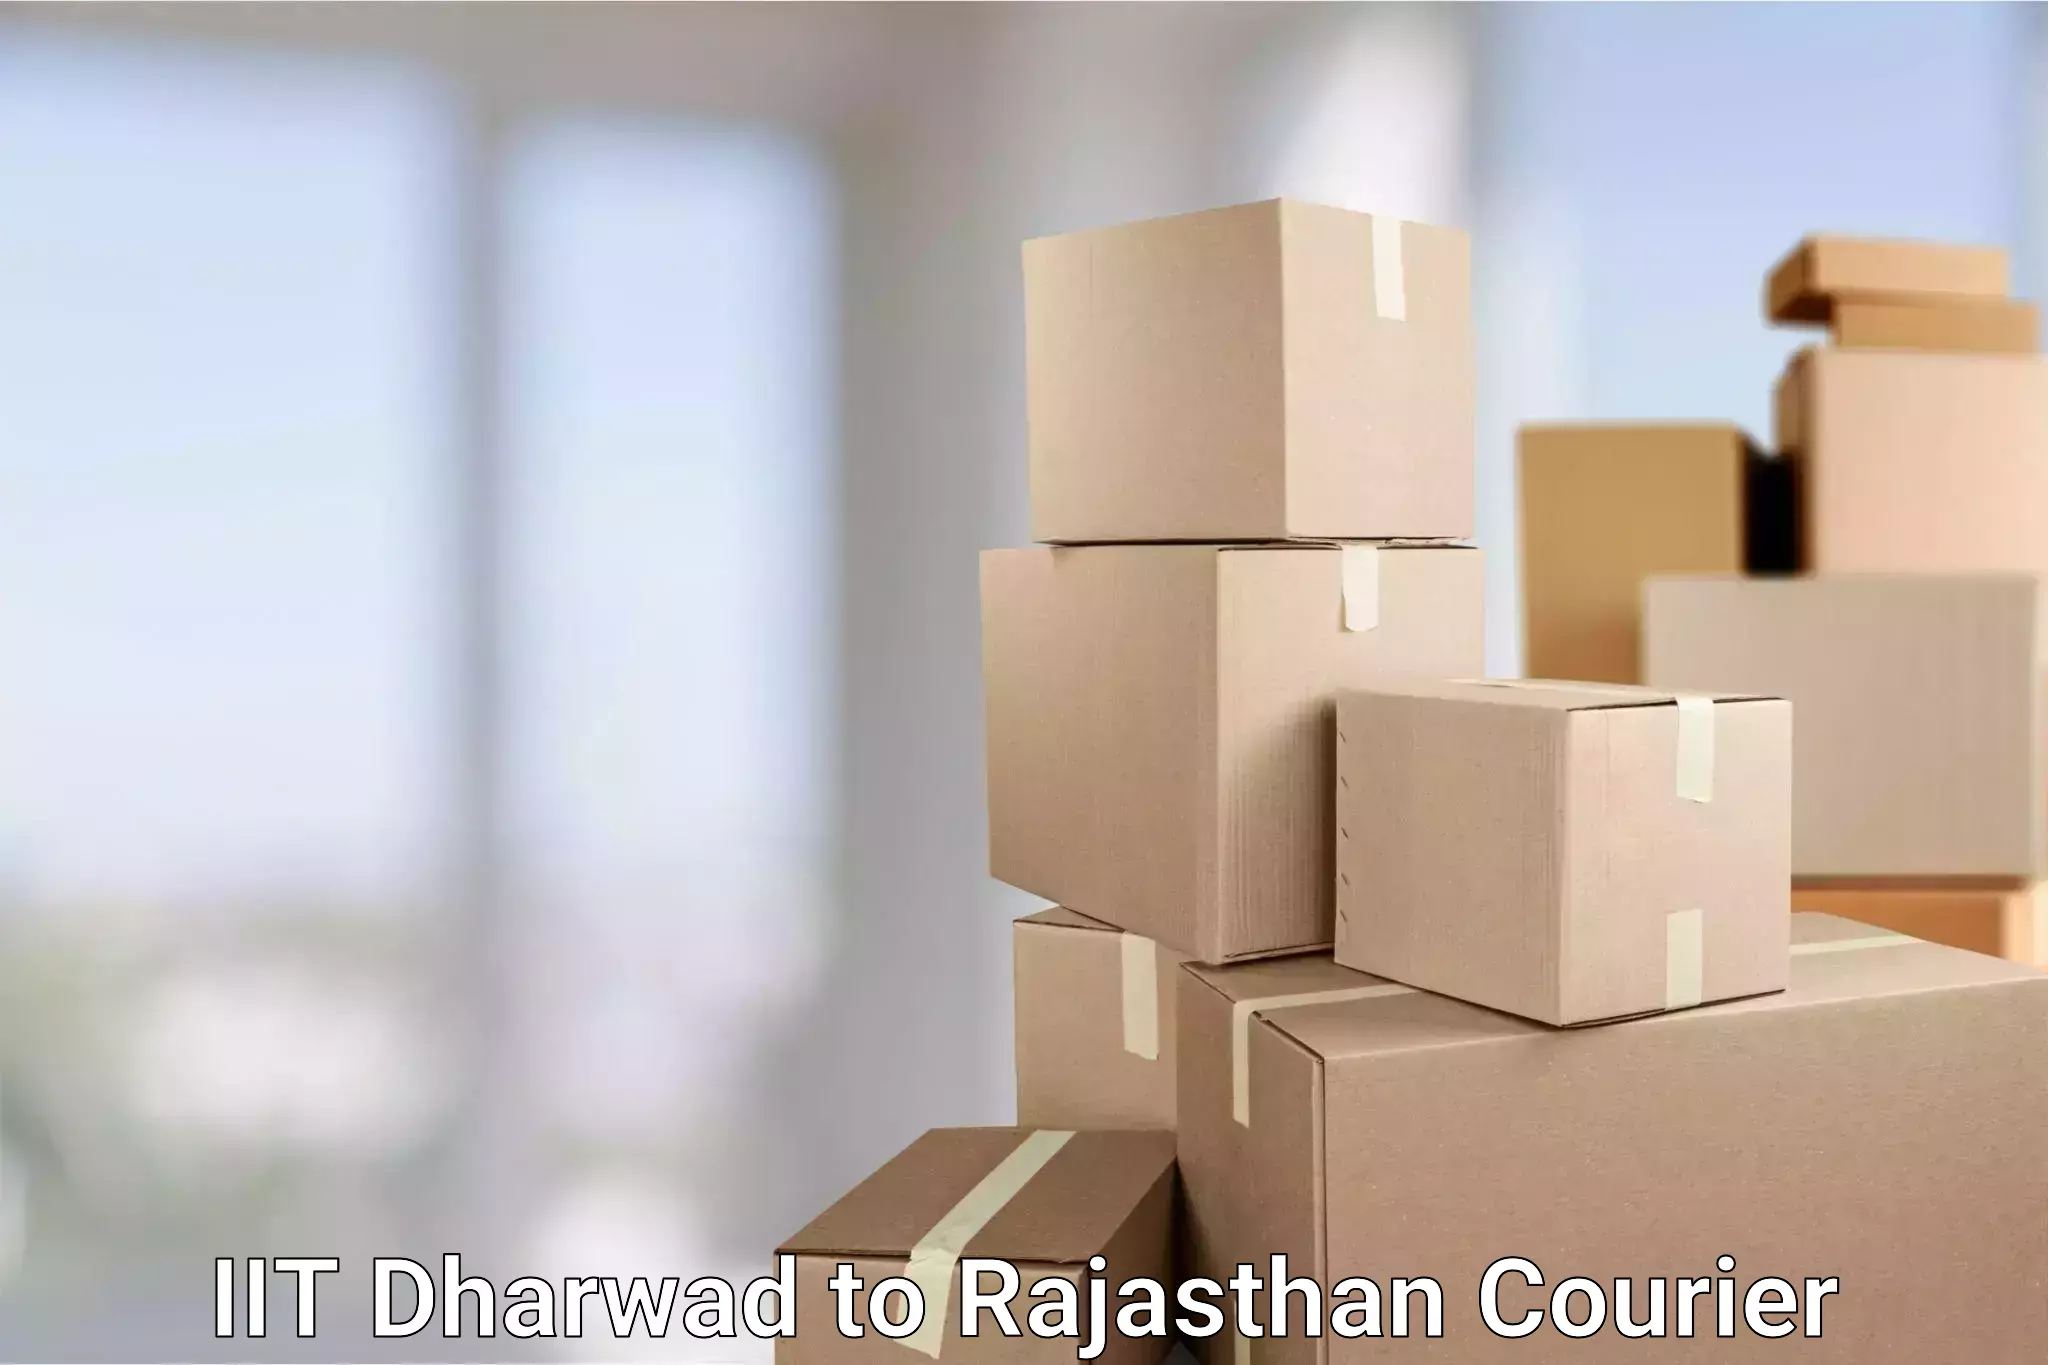 Round-the-clock parcel delivery IIT Dharwad to Kota